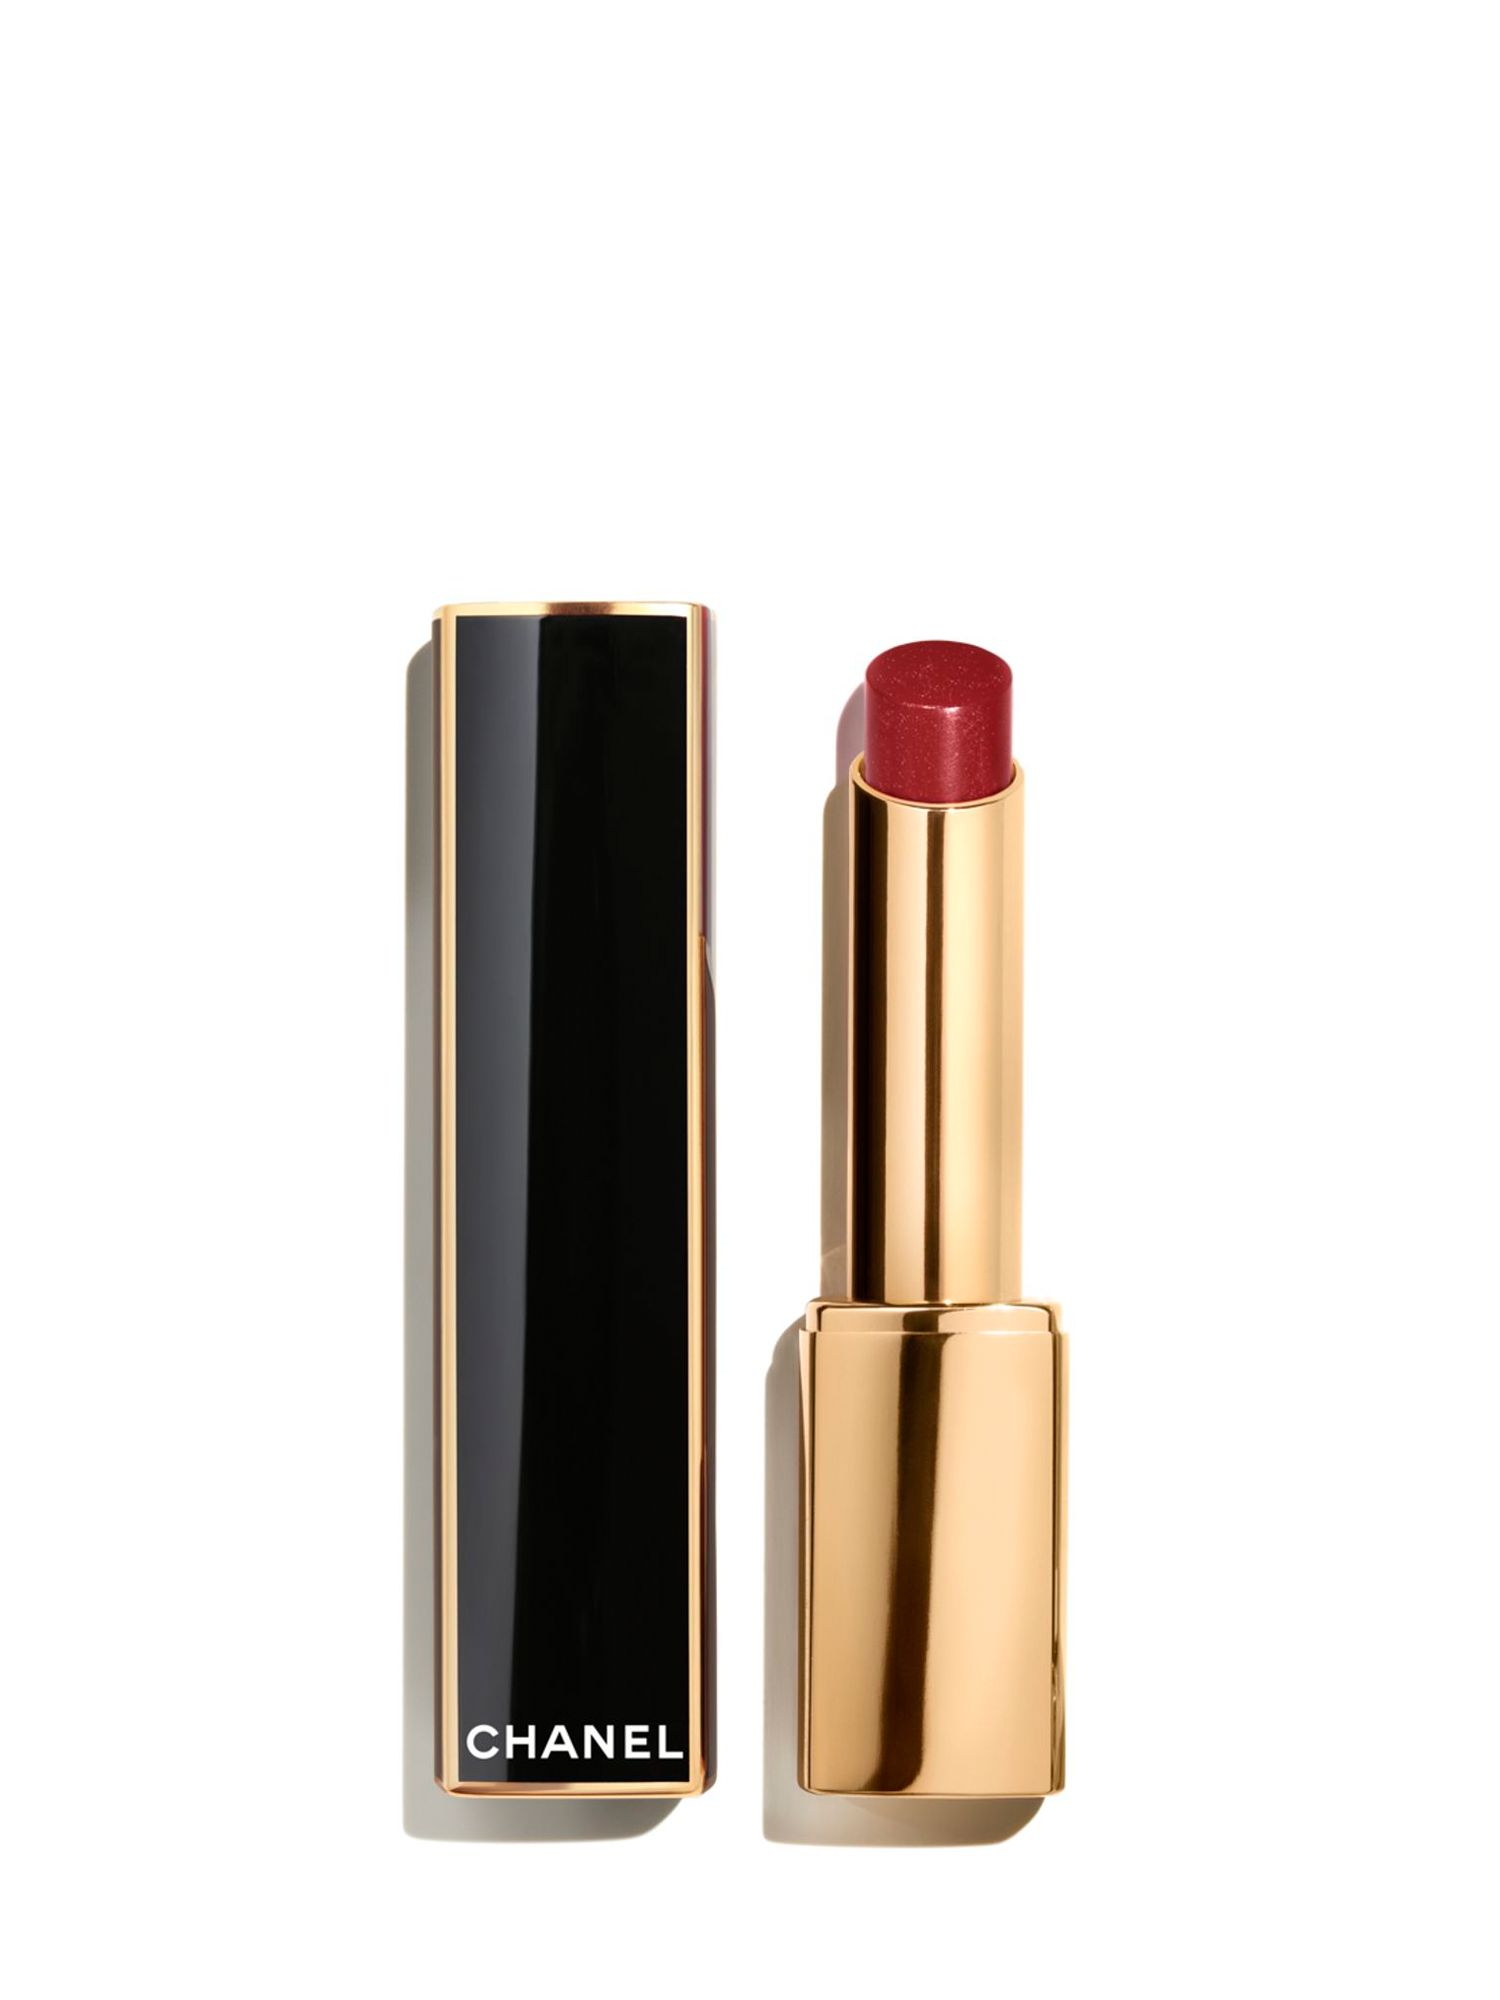 CHANEL Rouge Allure L'Extrait Exclusive Creation High-Intensity